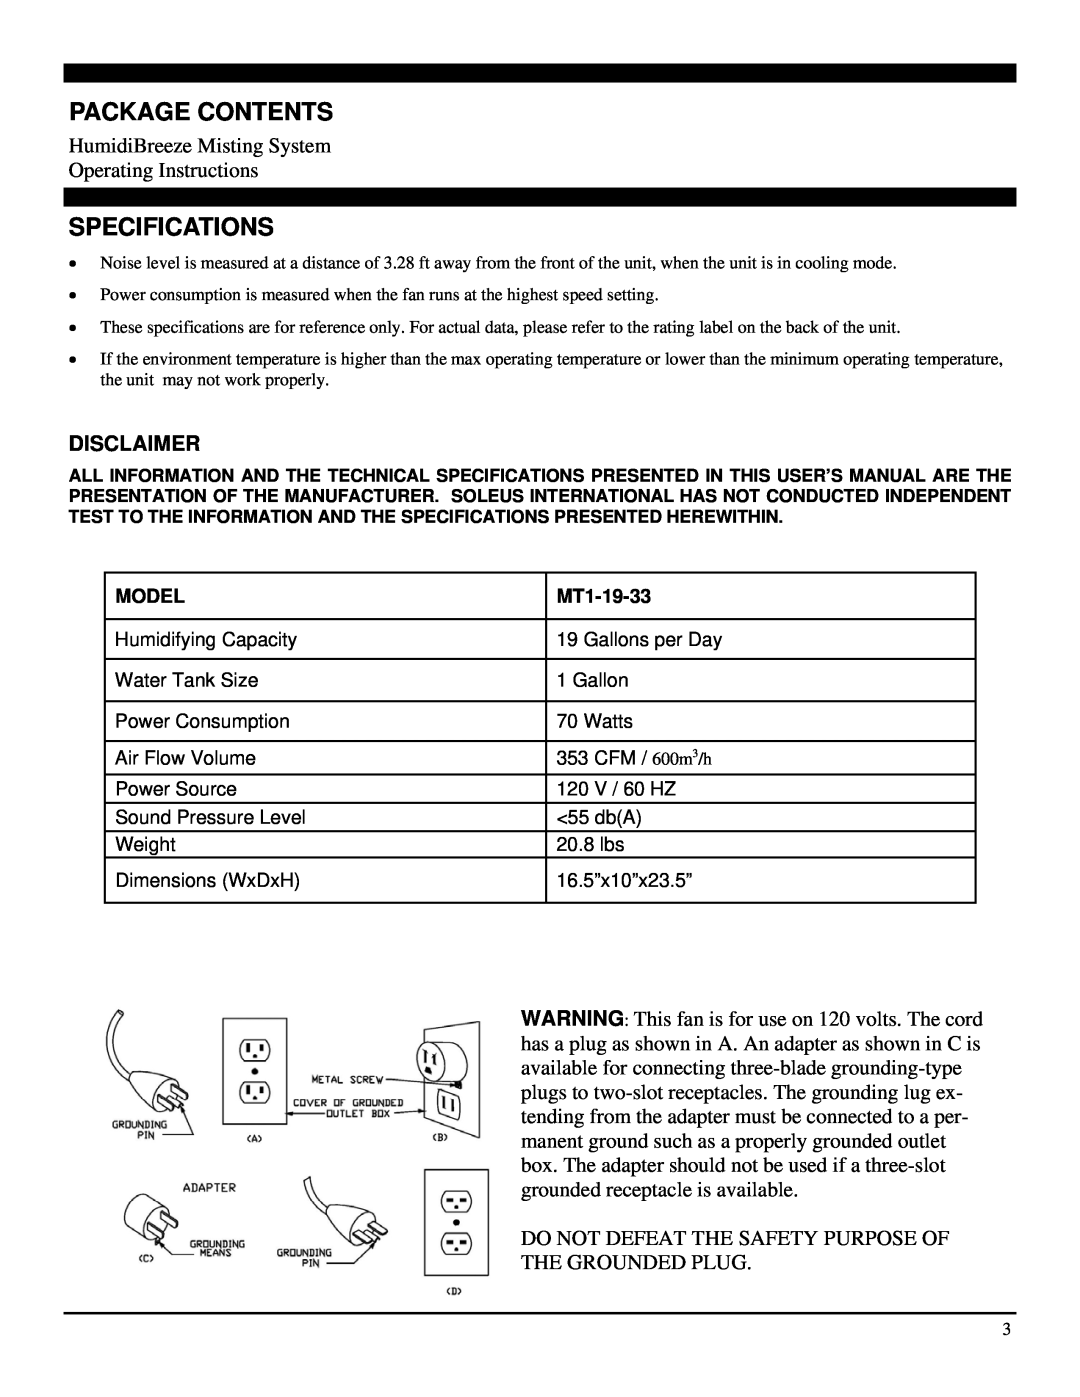 Soleus Air MT1-19-33 operating instructions Package Contents, Specifications, Disclaimer 